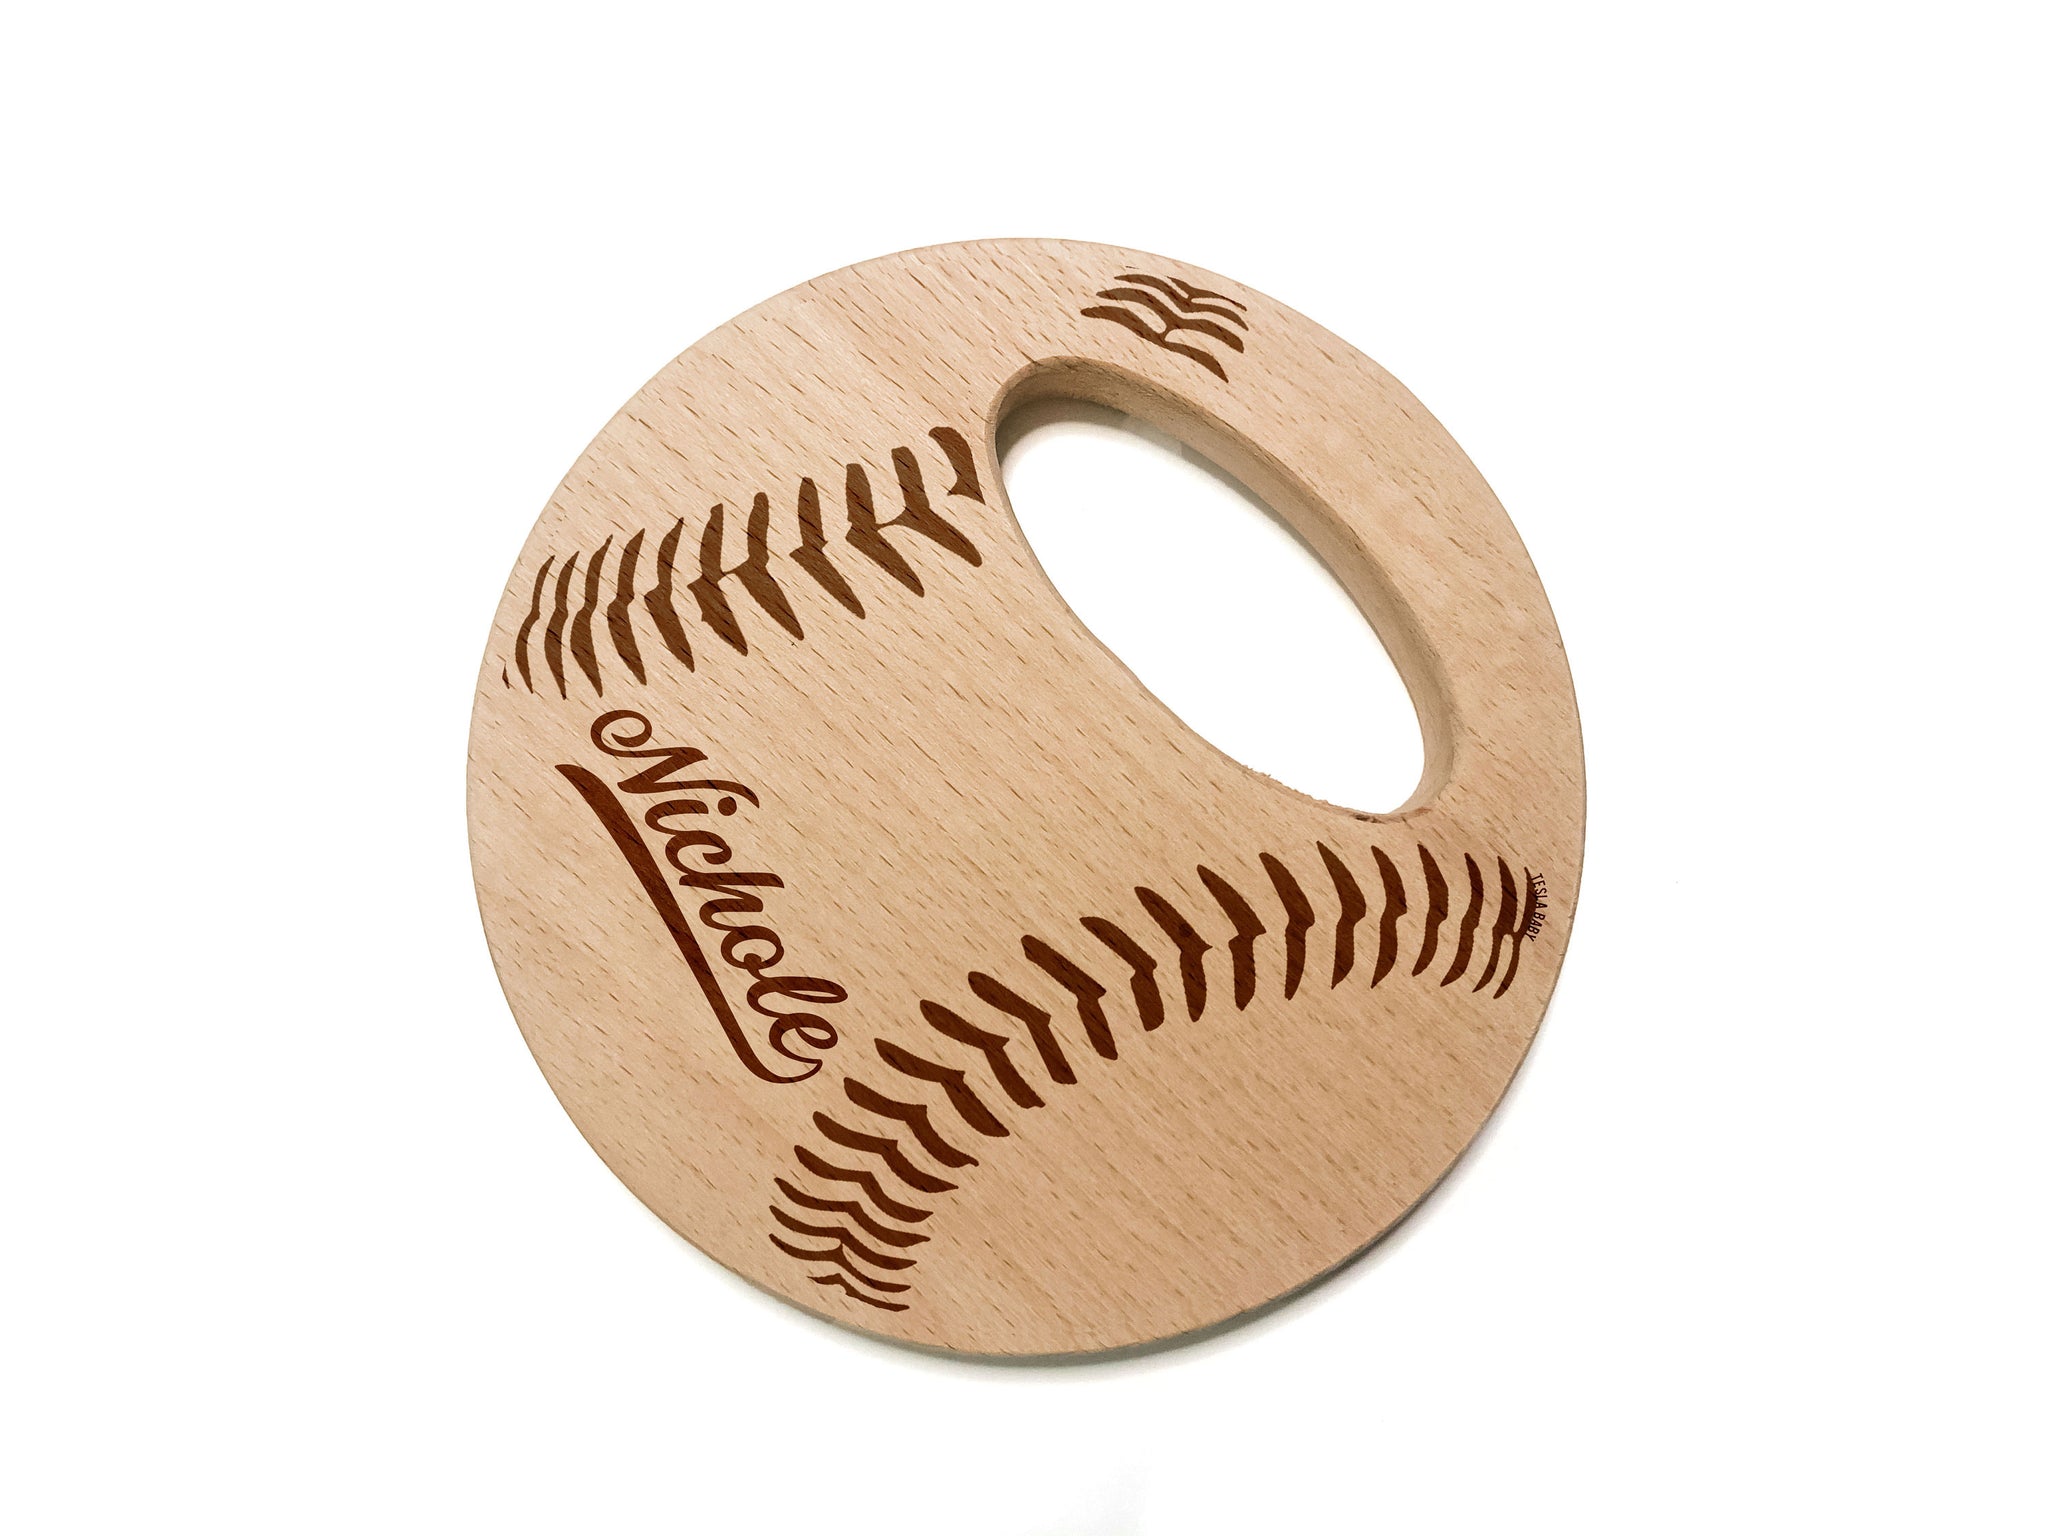 Large 4 inch Baseball Wood Shape and Wood Toy - DIY Wood - Beech Soothing Tesla Bite - Montessori Toy - Engravable - Personalized